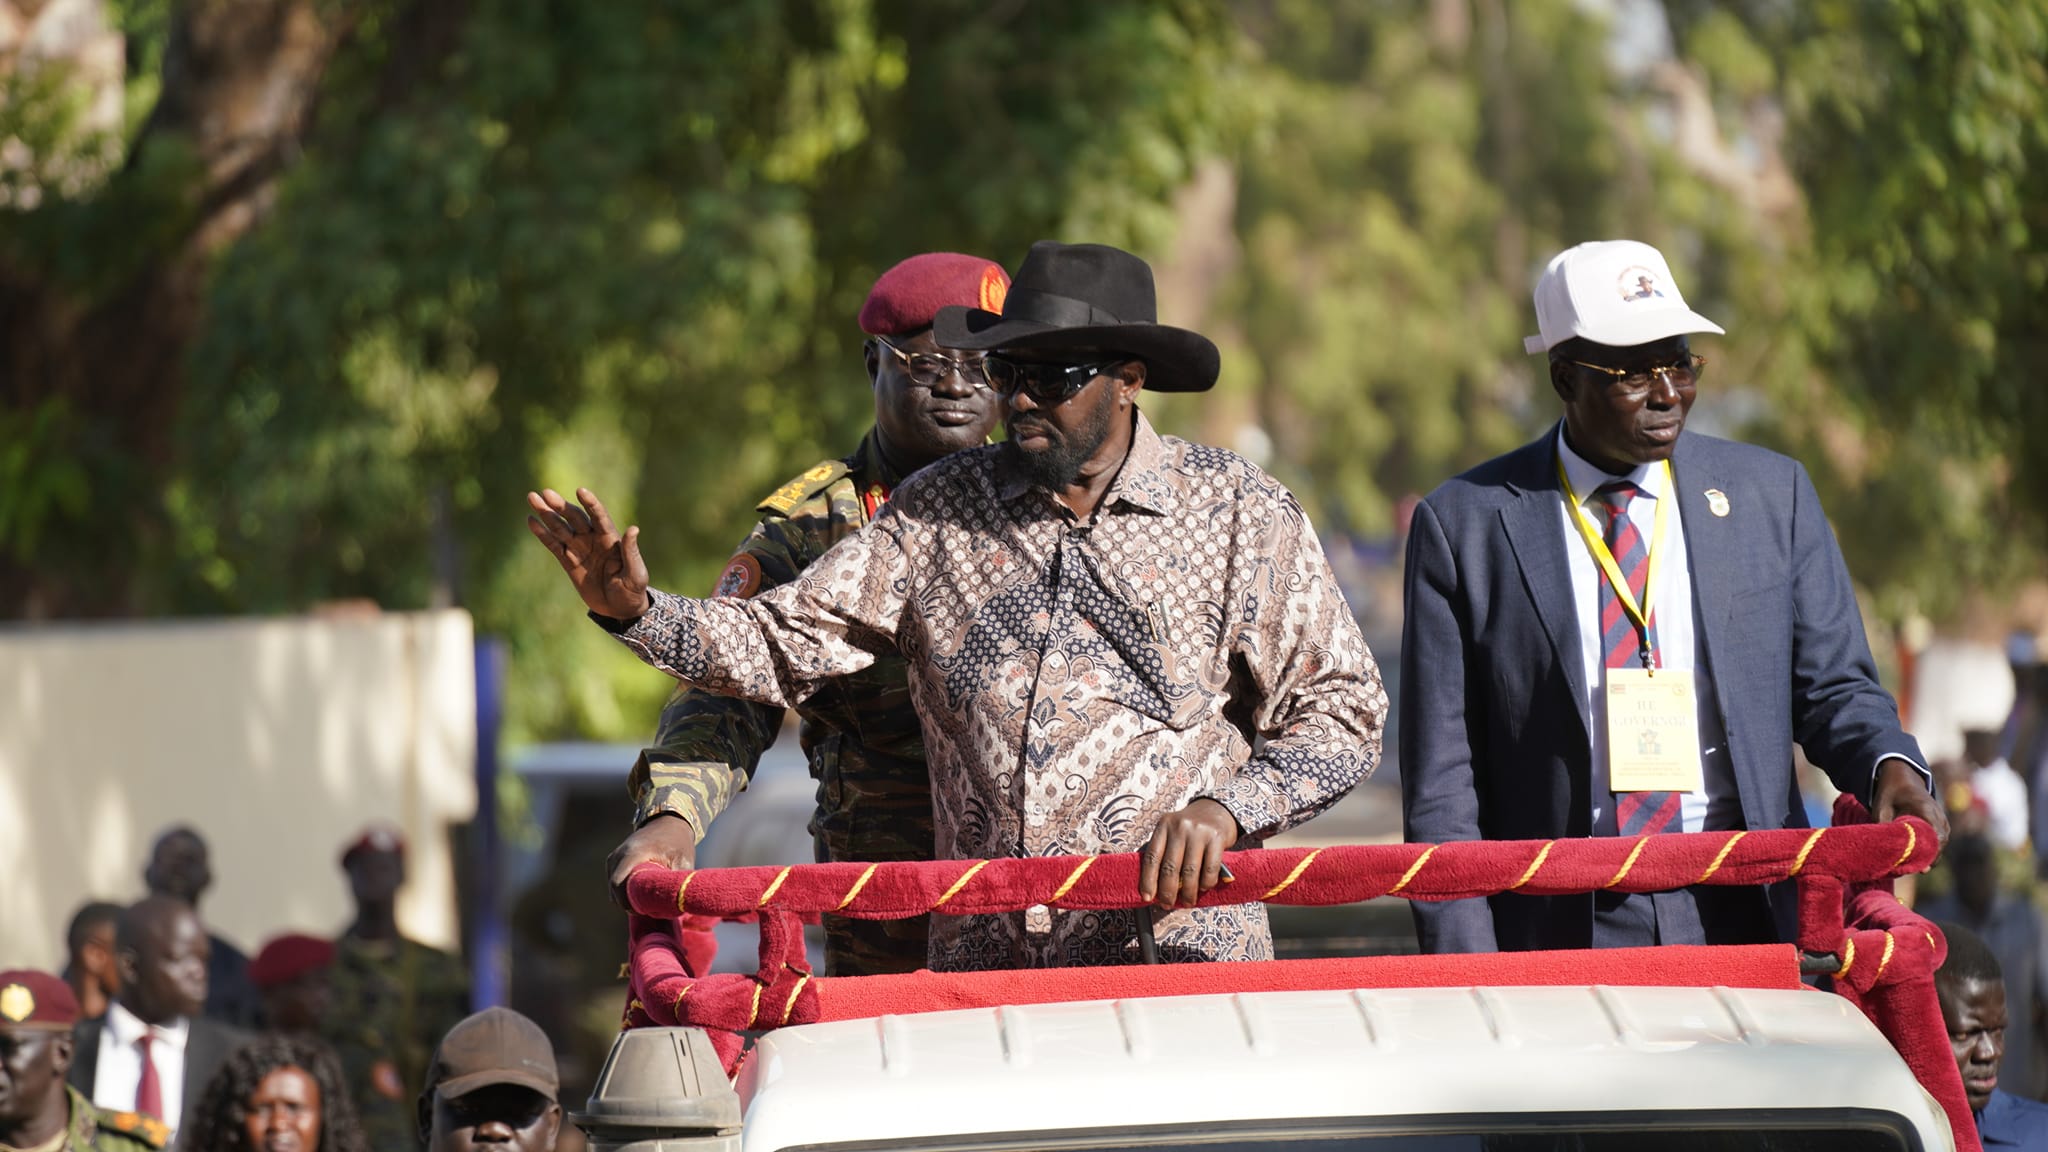 No more extension, gov’t ready for elections -Kiir